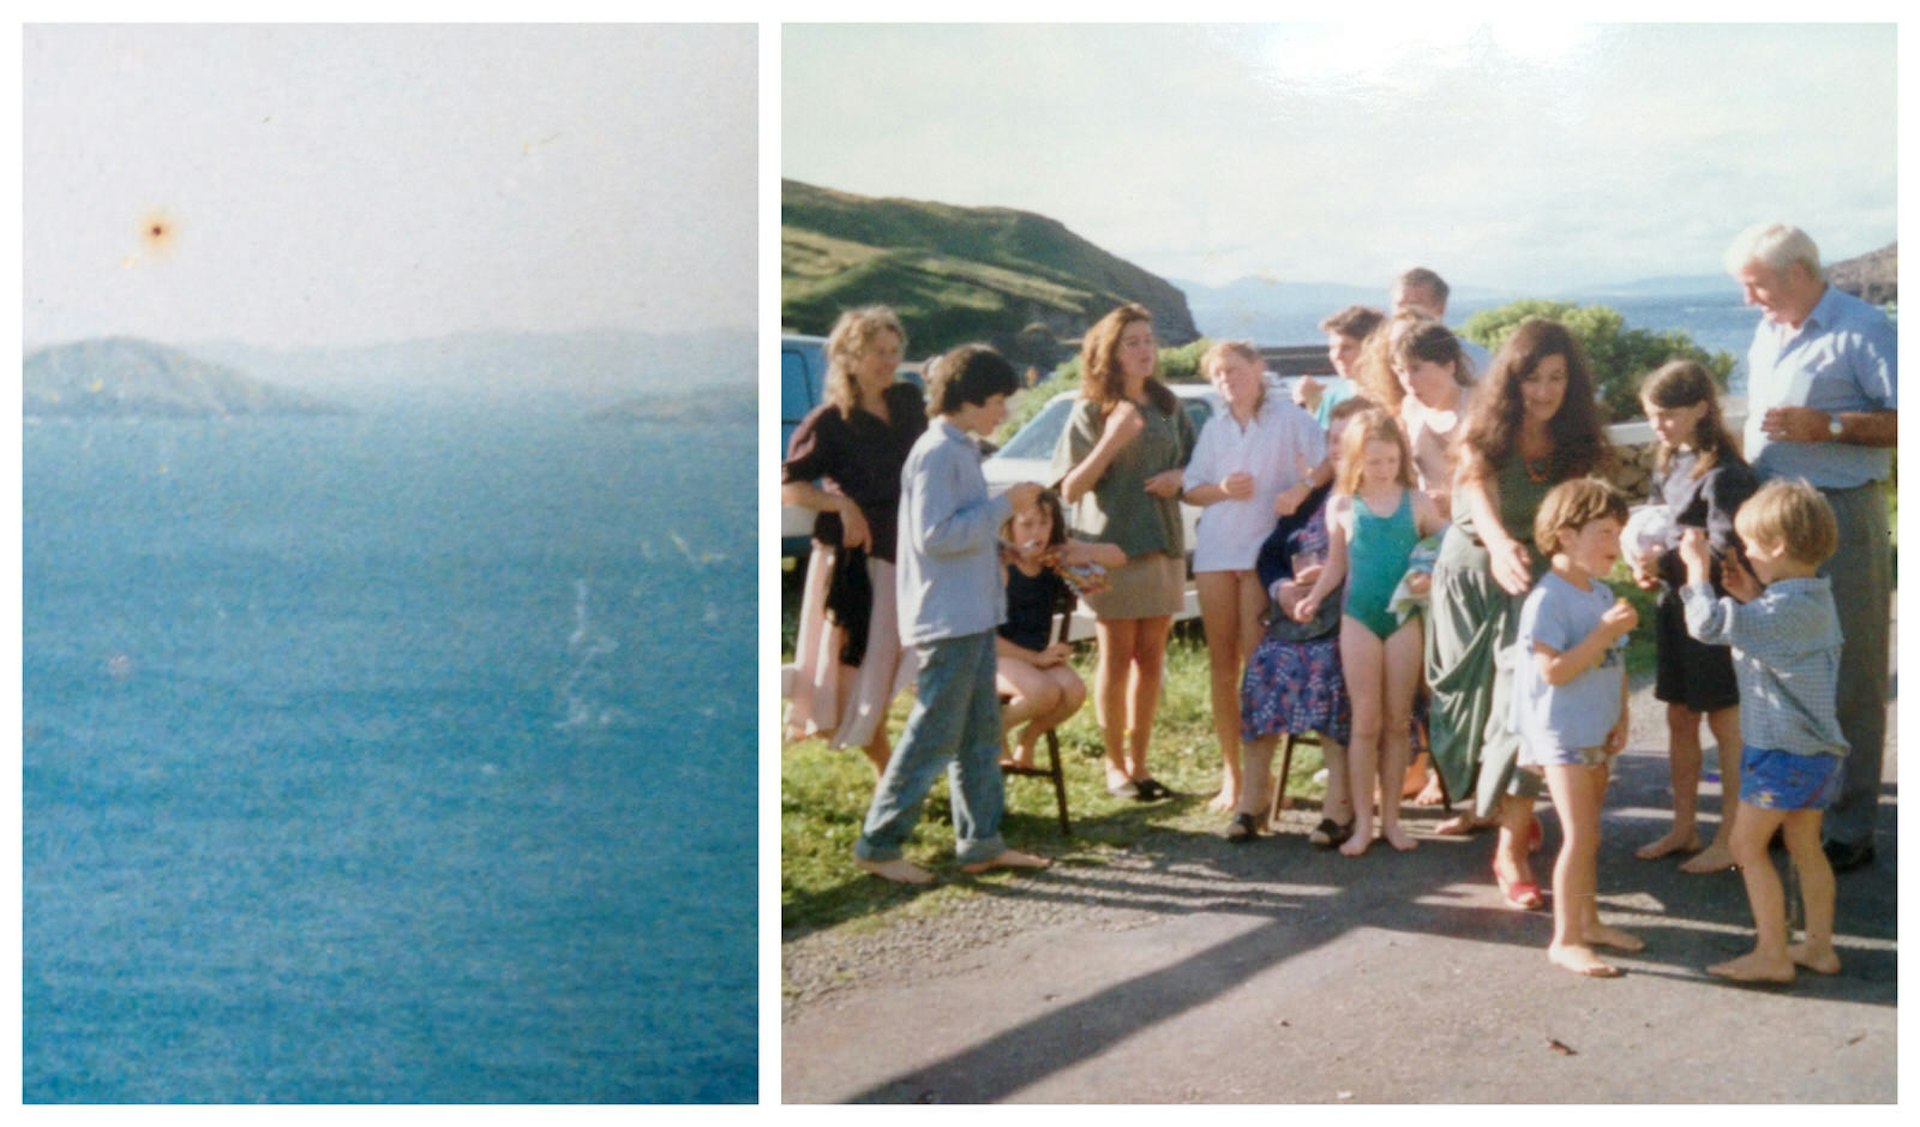 The left of the picture shows a grainy old close up of a bay in Kerry, the right shows a family of 15 people on a sunny day in Kerry posing for a picture.